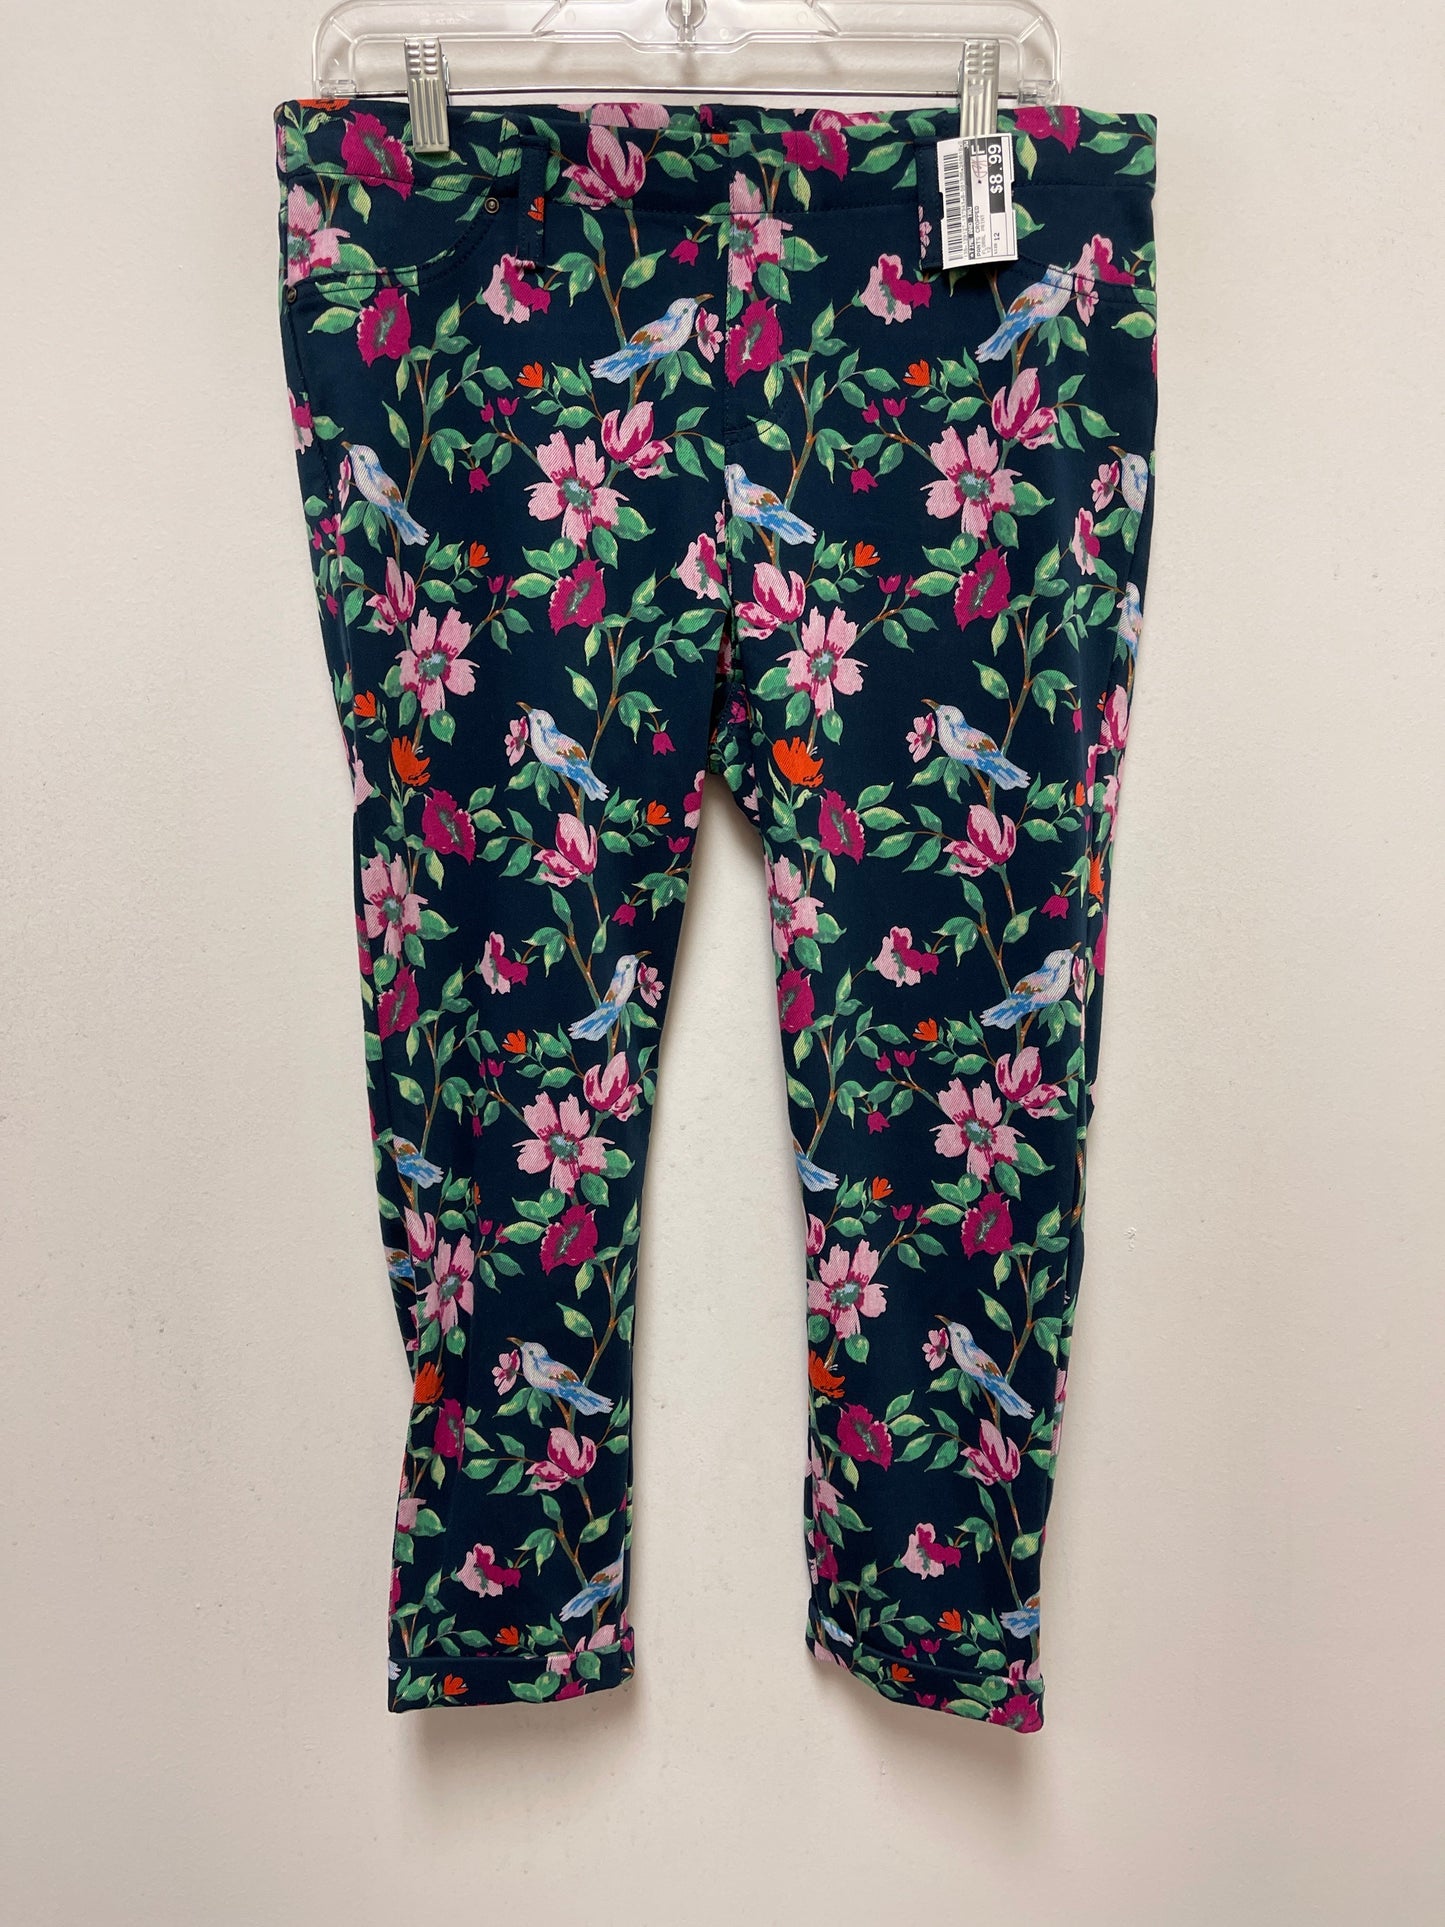 Floral Print Pants Cropped Time And Tru, Size 12